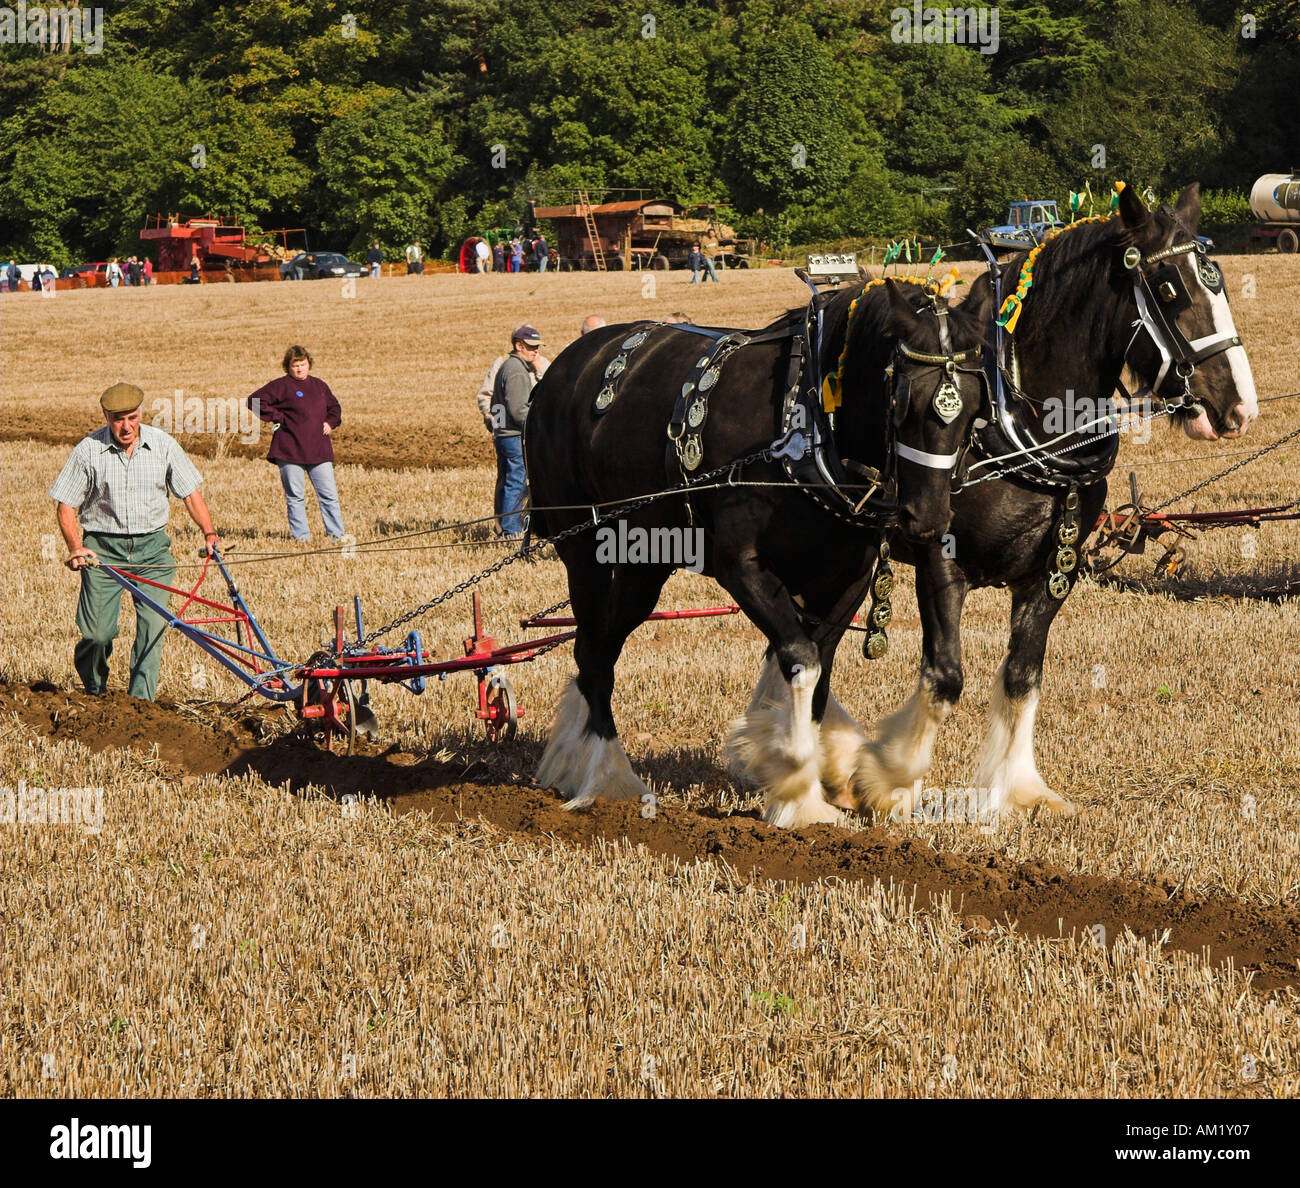 shires-ploughing-horses-ploughing-a-field-AM1Y07.jpg